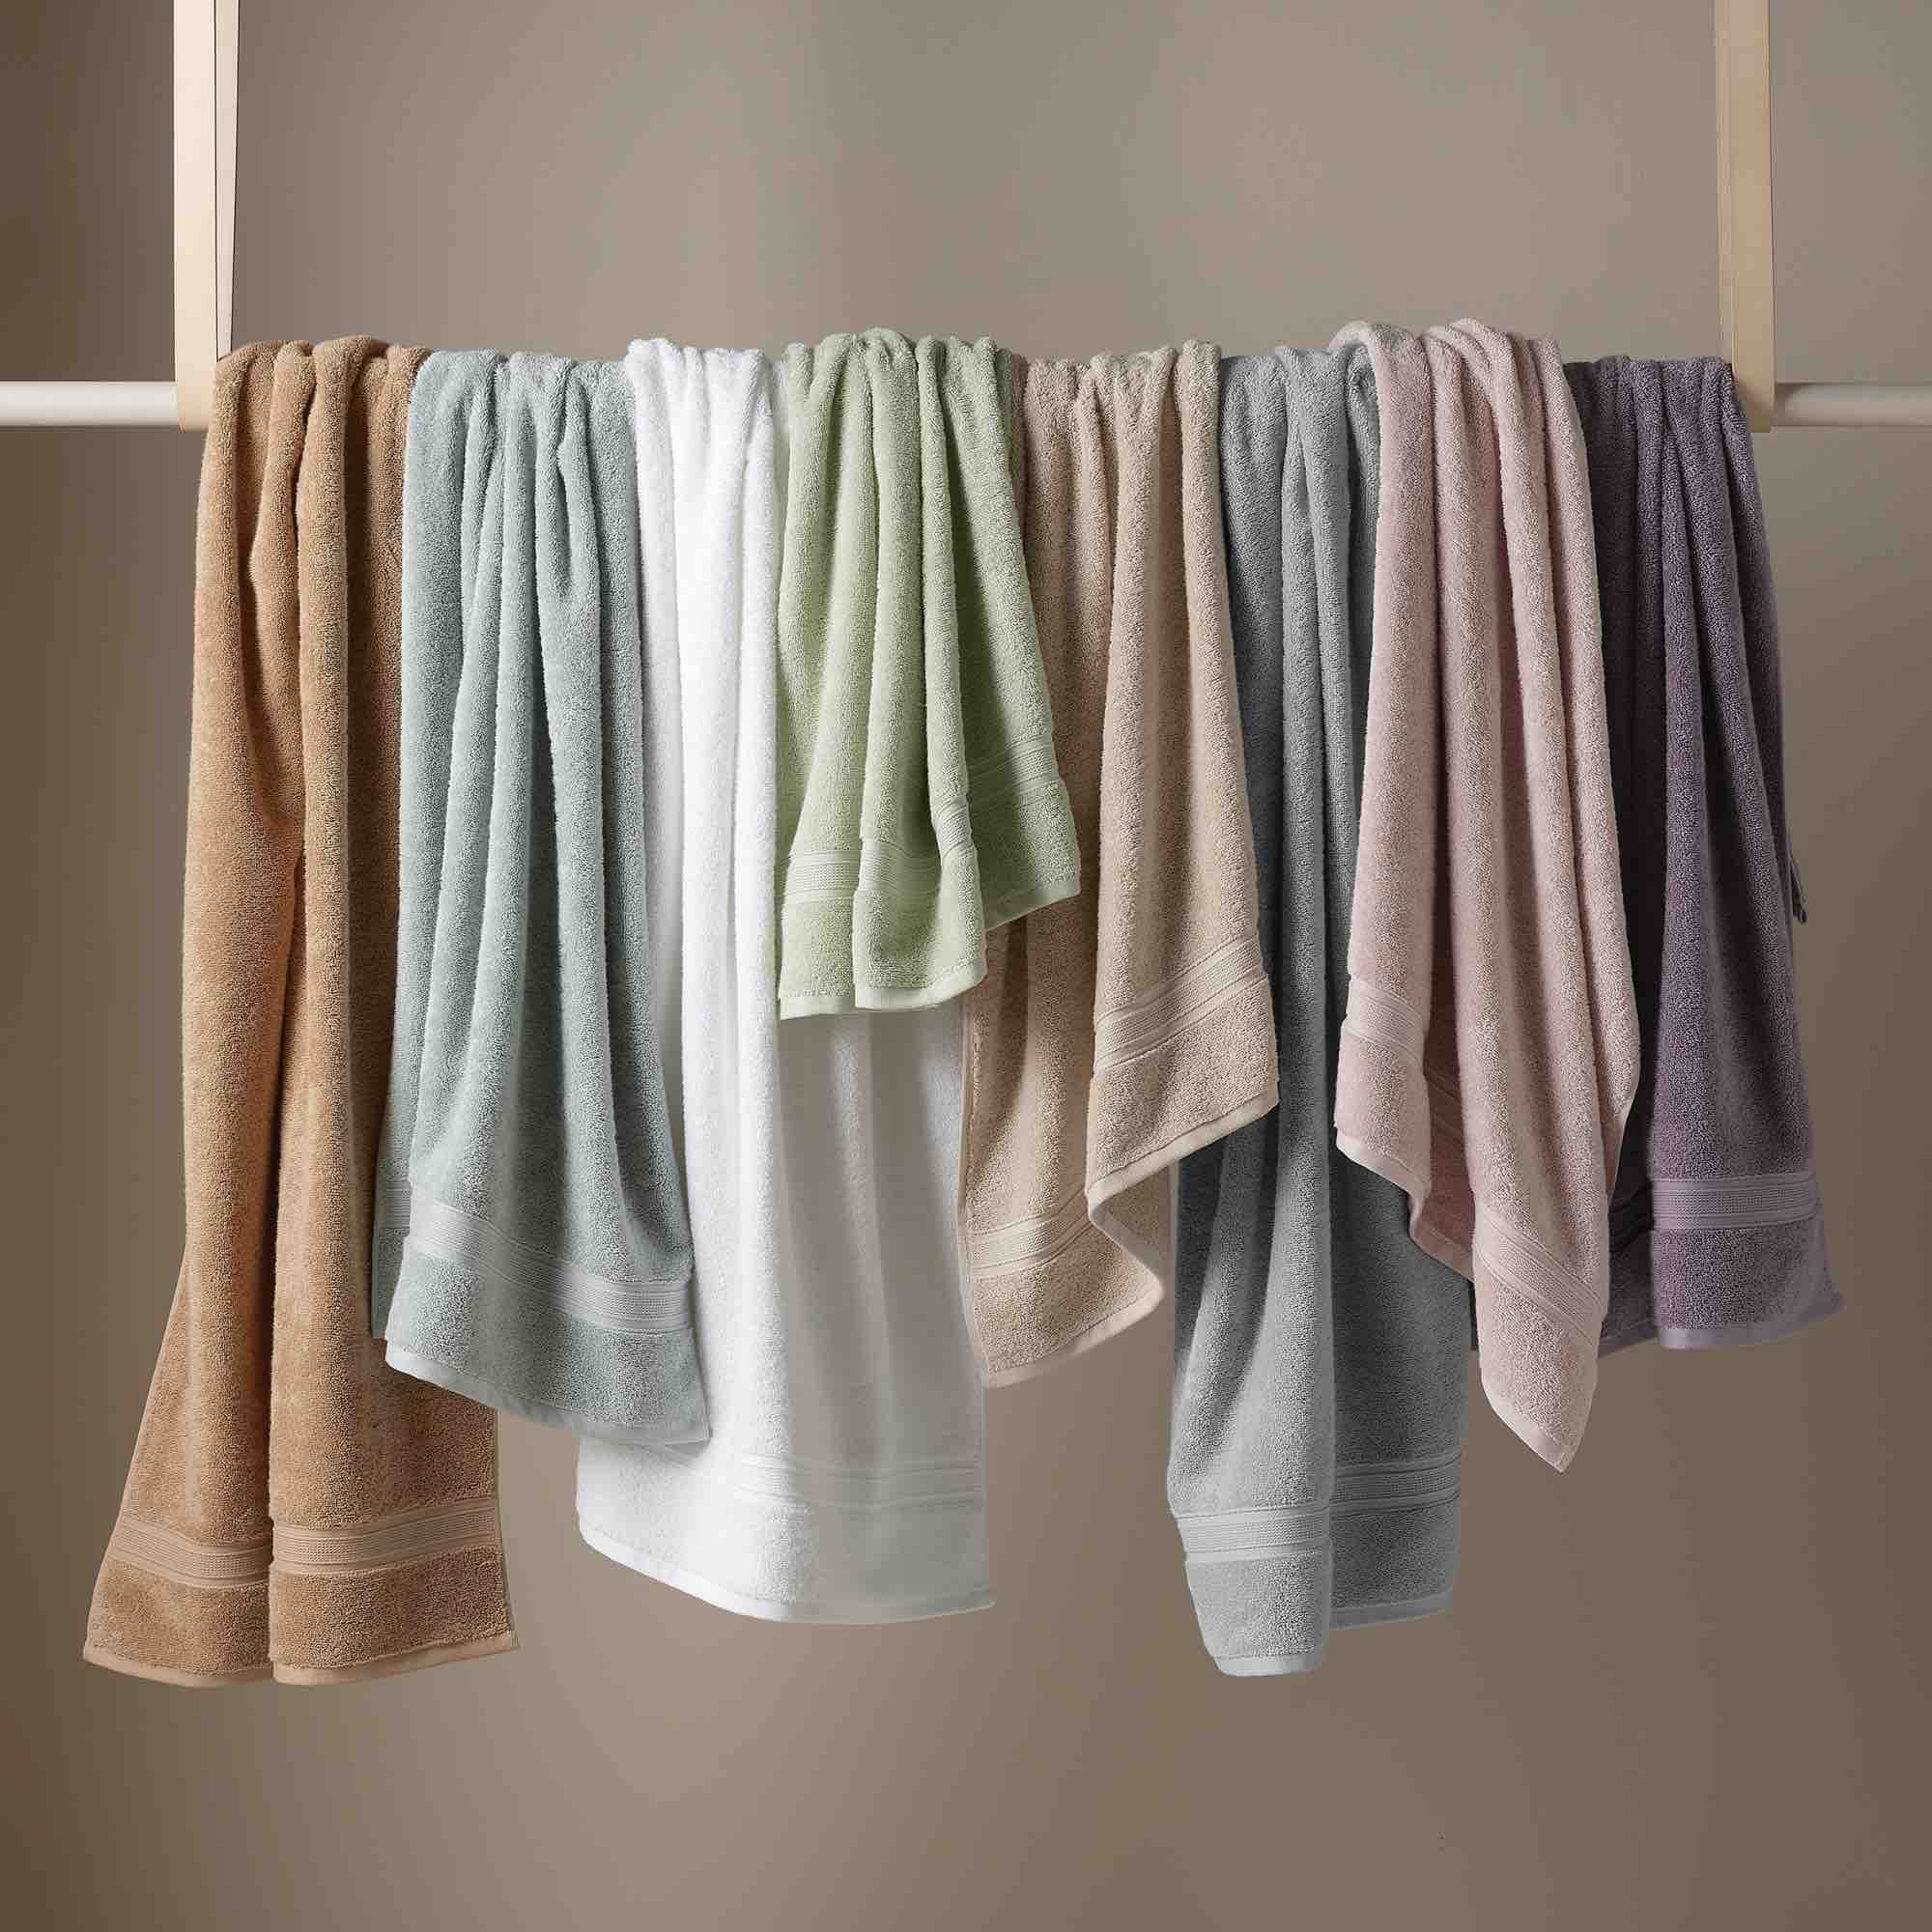 Christy Serene Combed Cotton Towel - Chai Latte